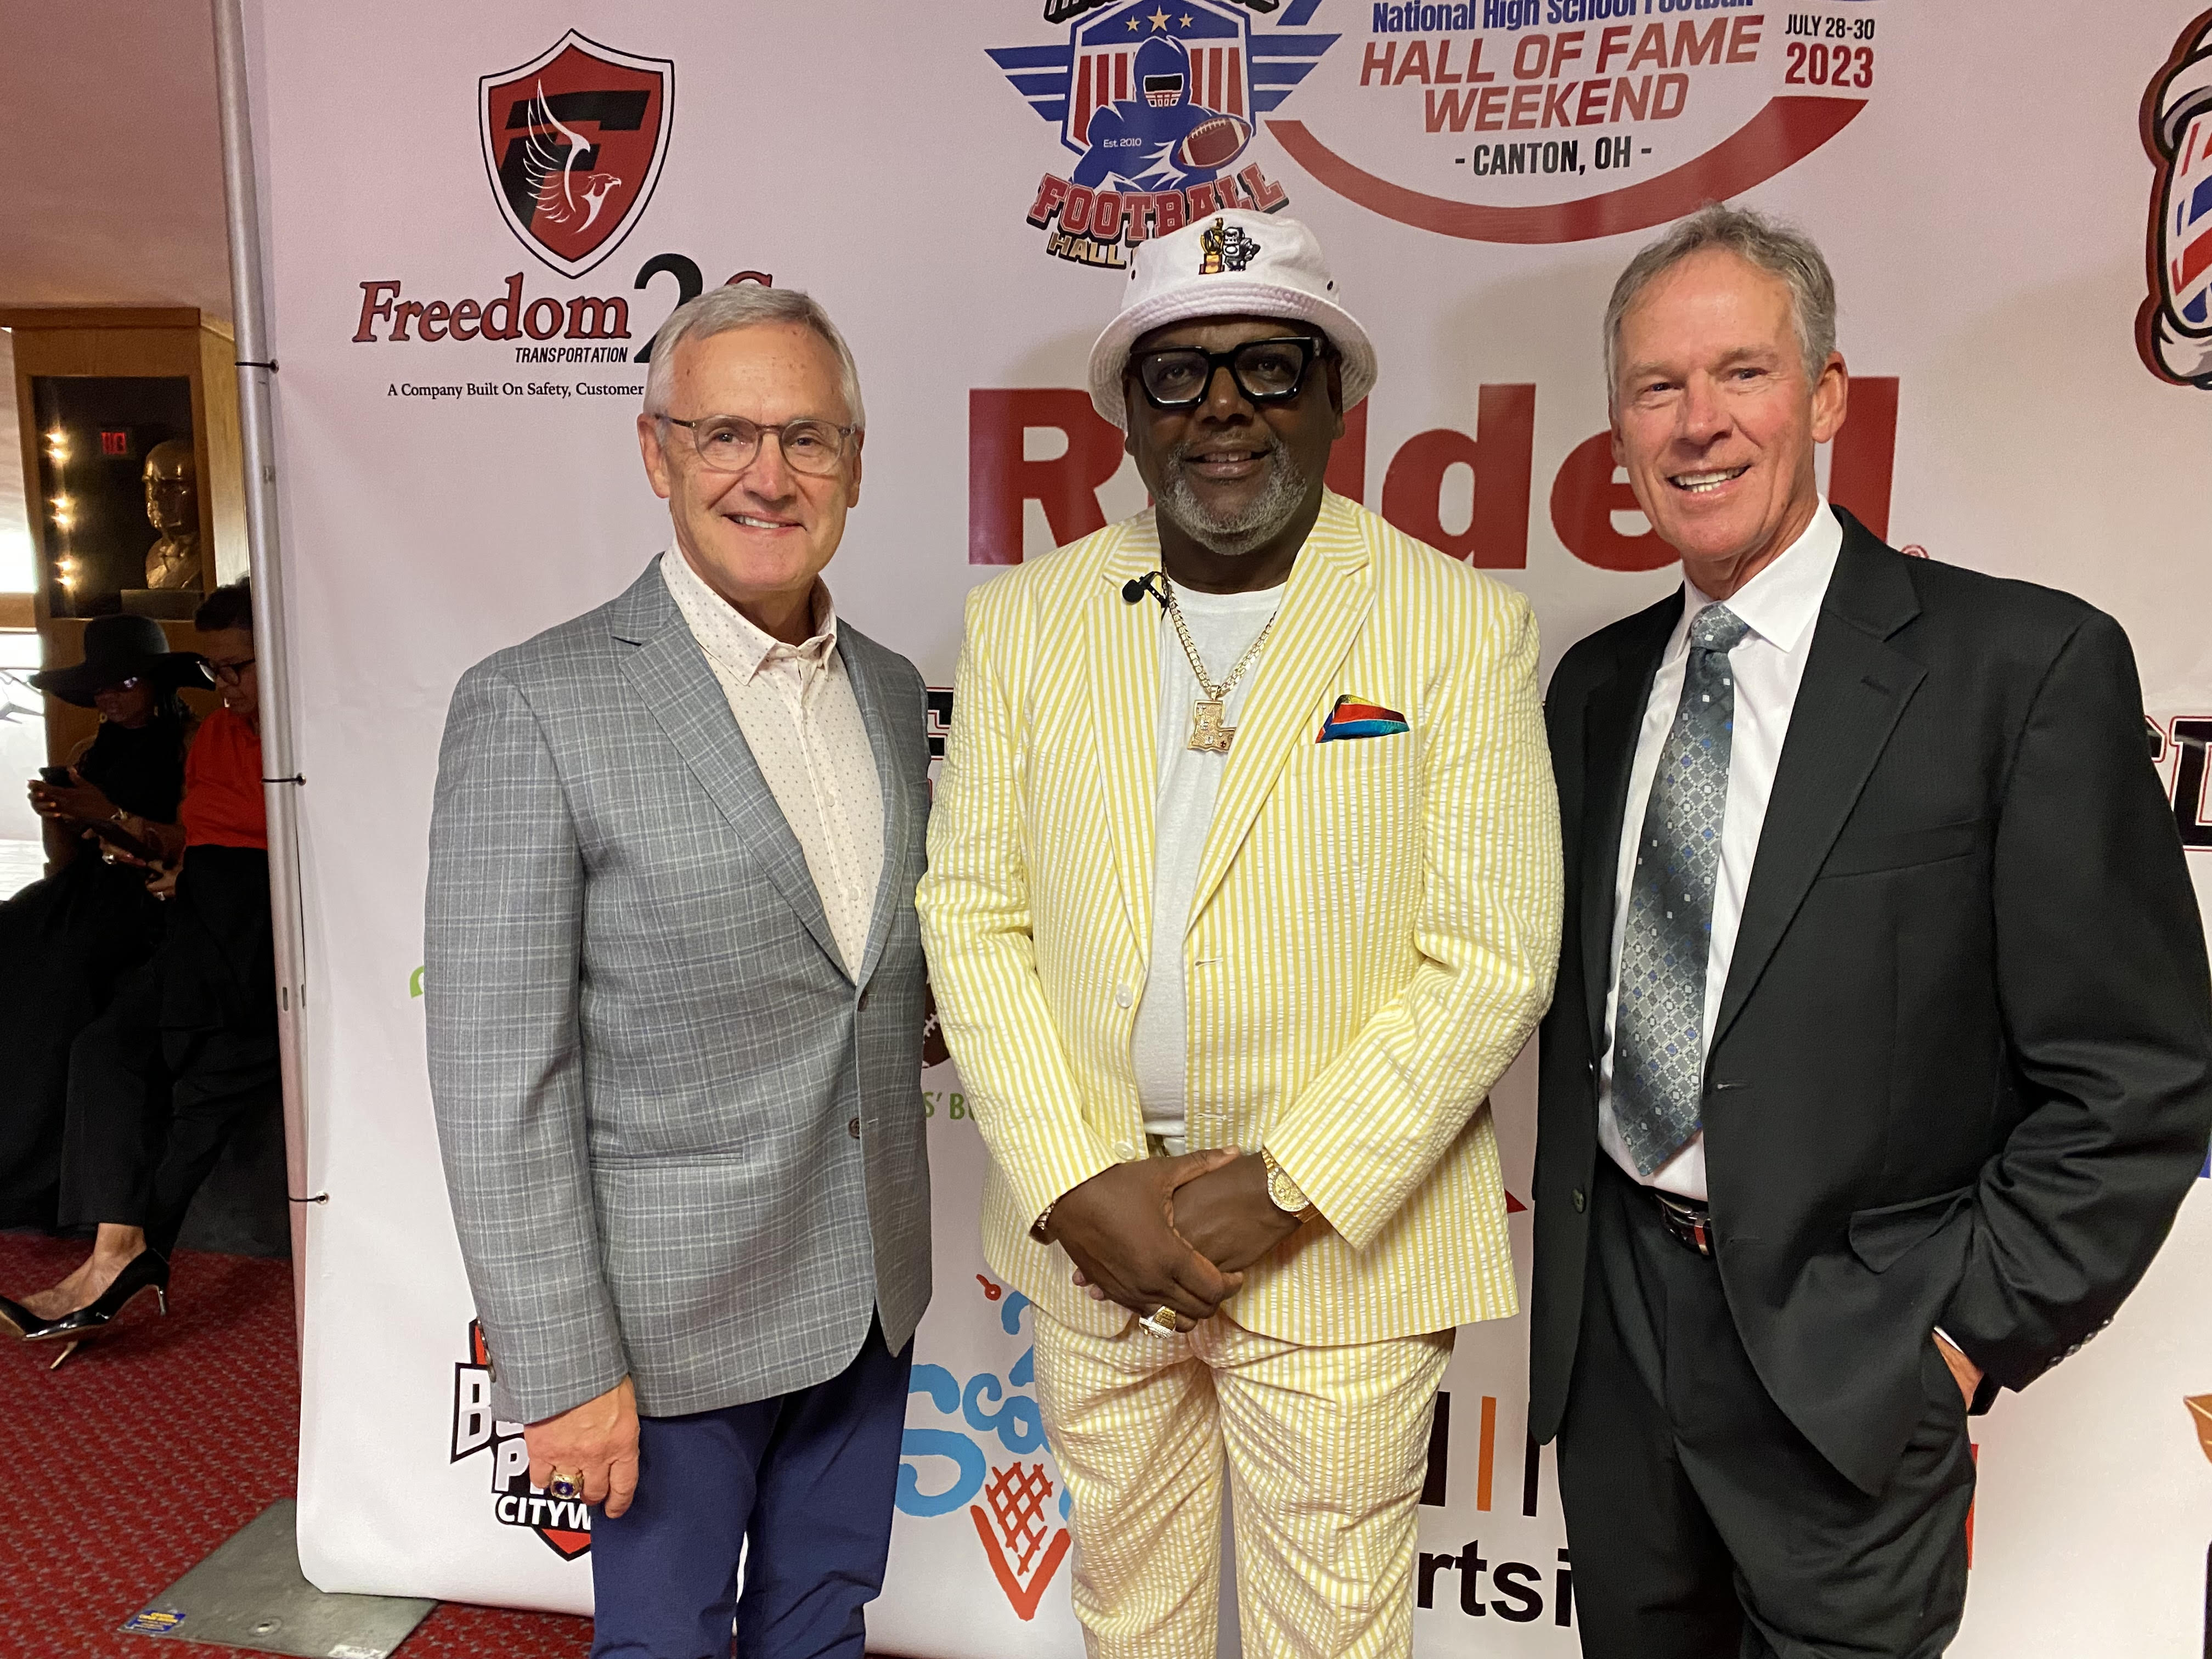 Browns legend Kevin Mack excited for USFL season, teams in Canton